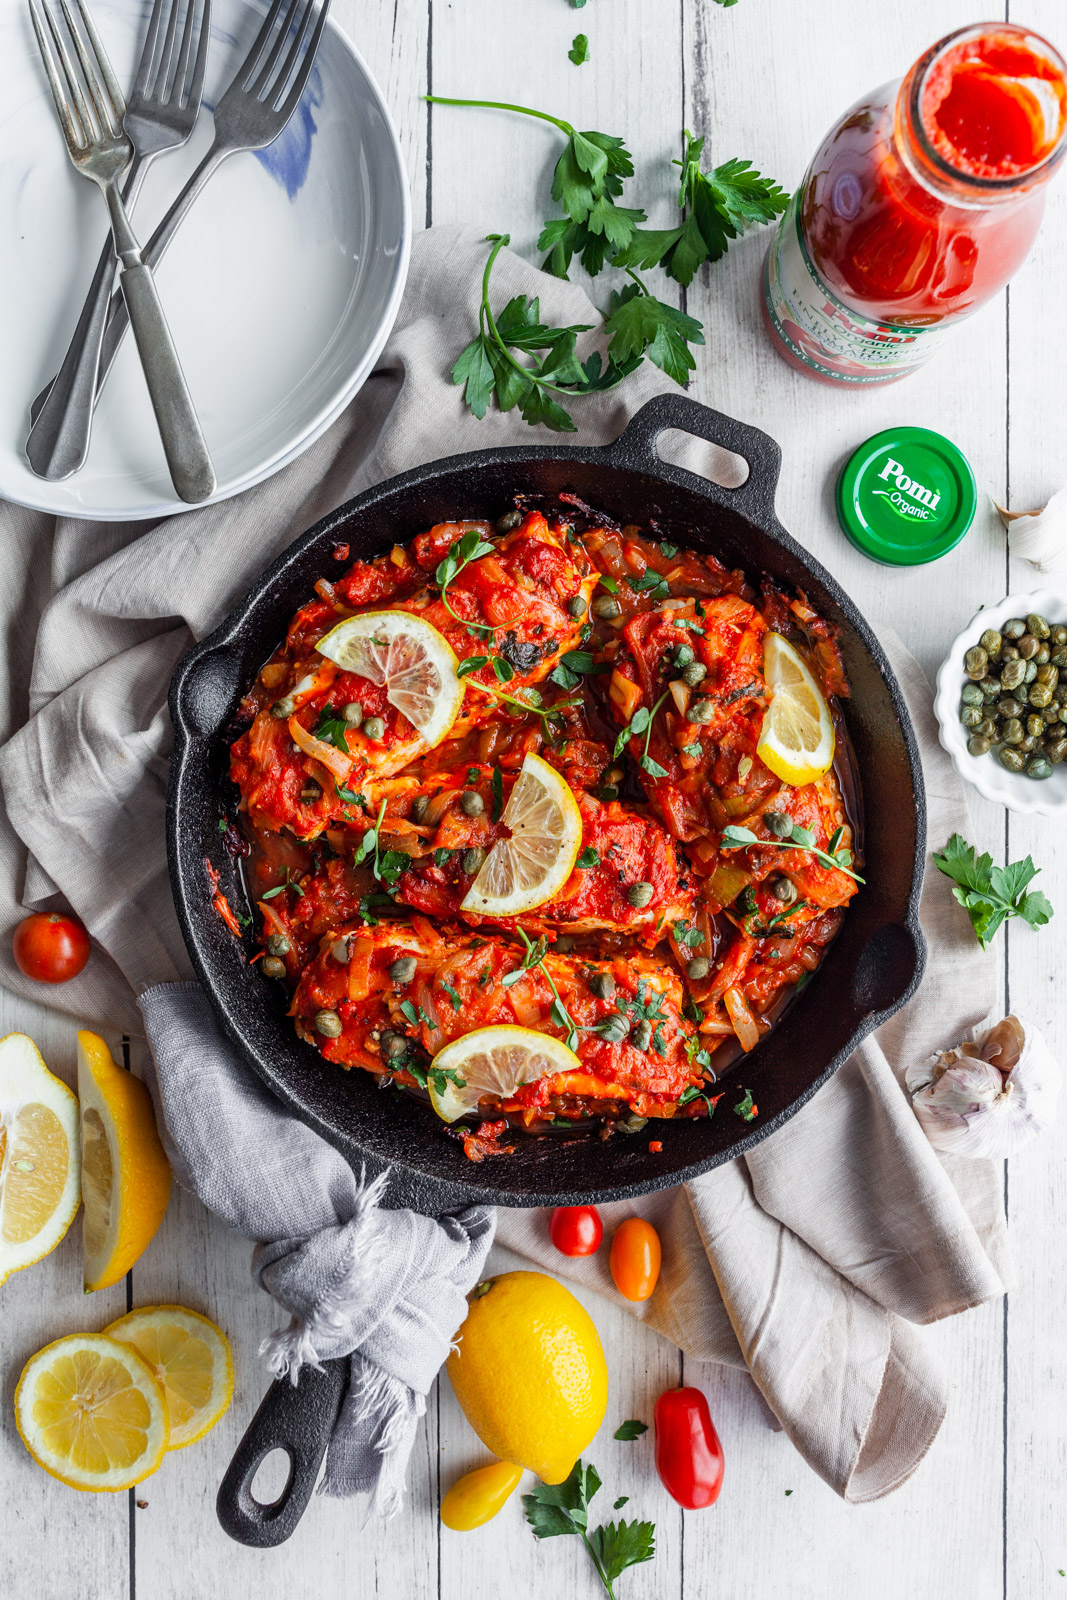 Greekstyle Baked Fish With Tomatoes and Onions (Bourdeto)